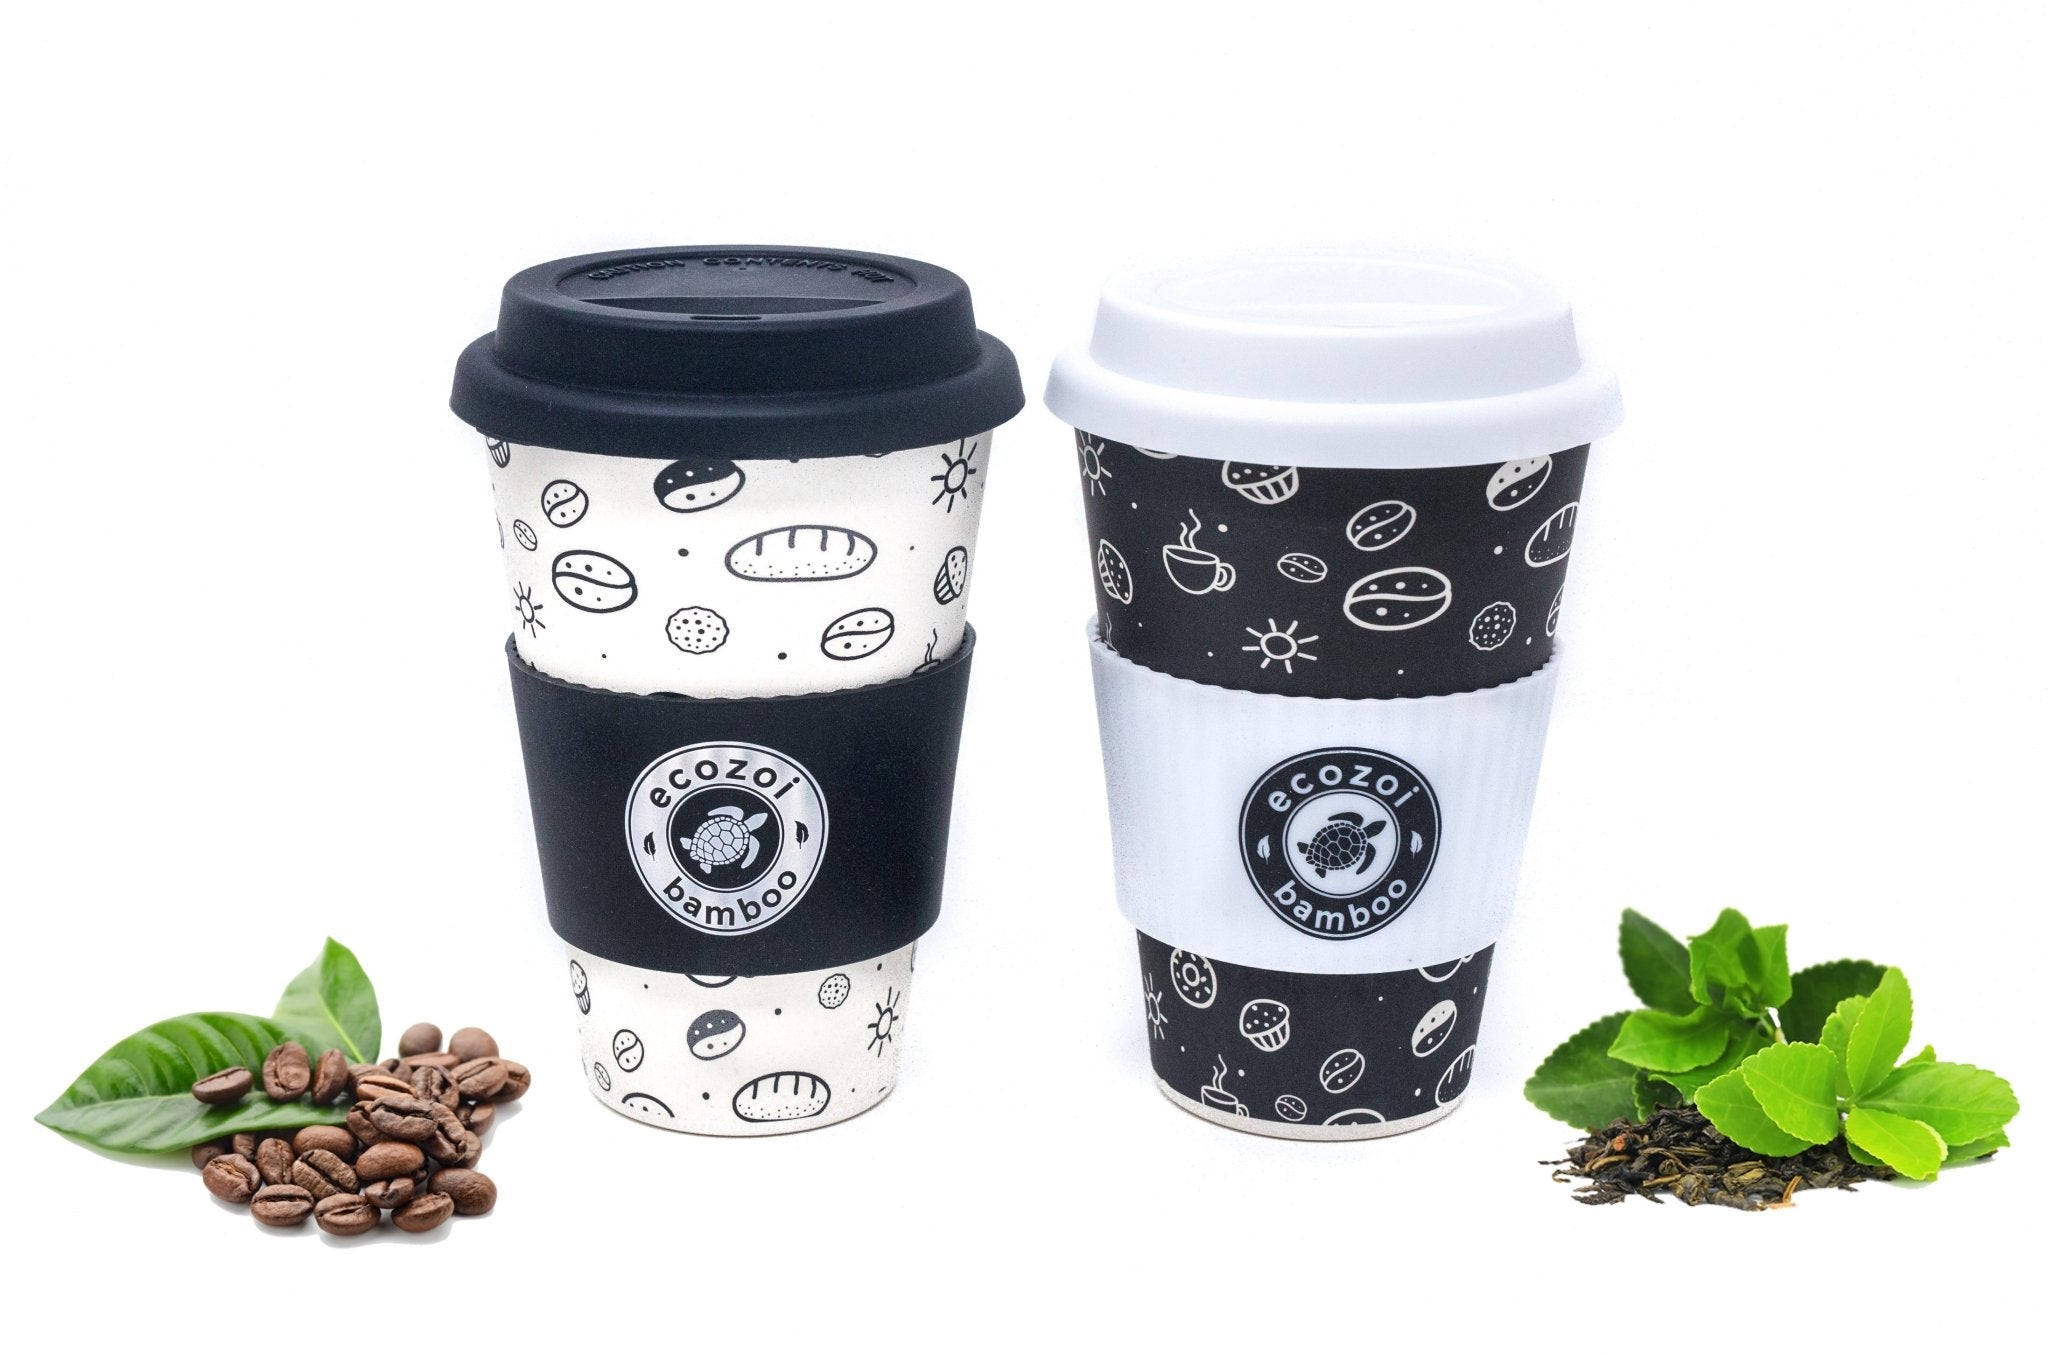 ecozoi Reusable Bamboo Coffee Cups with Silicon Lid and sleeve, 16 oz, Set of 2